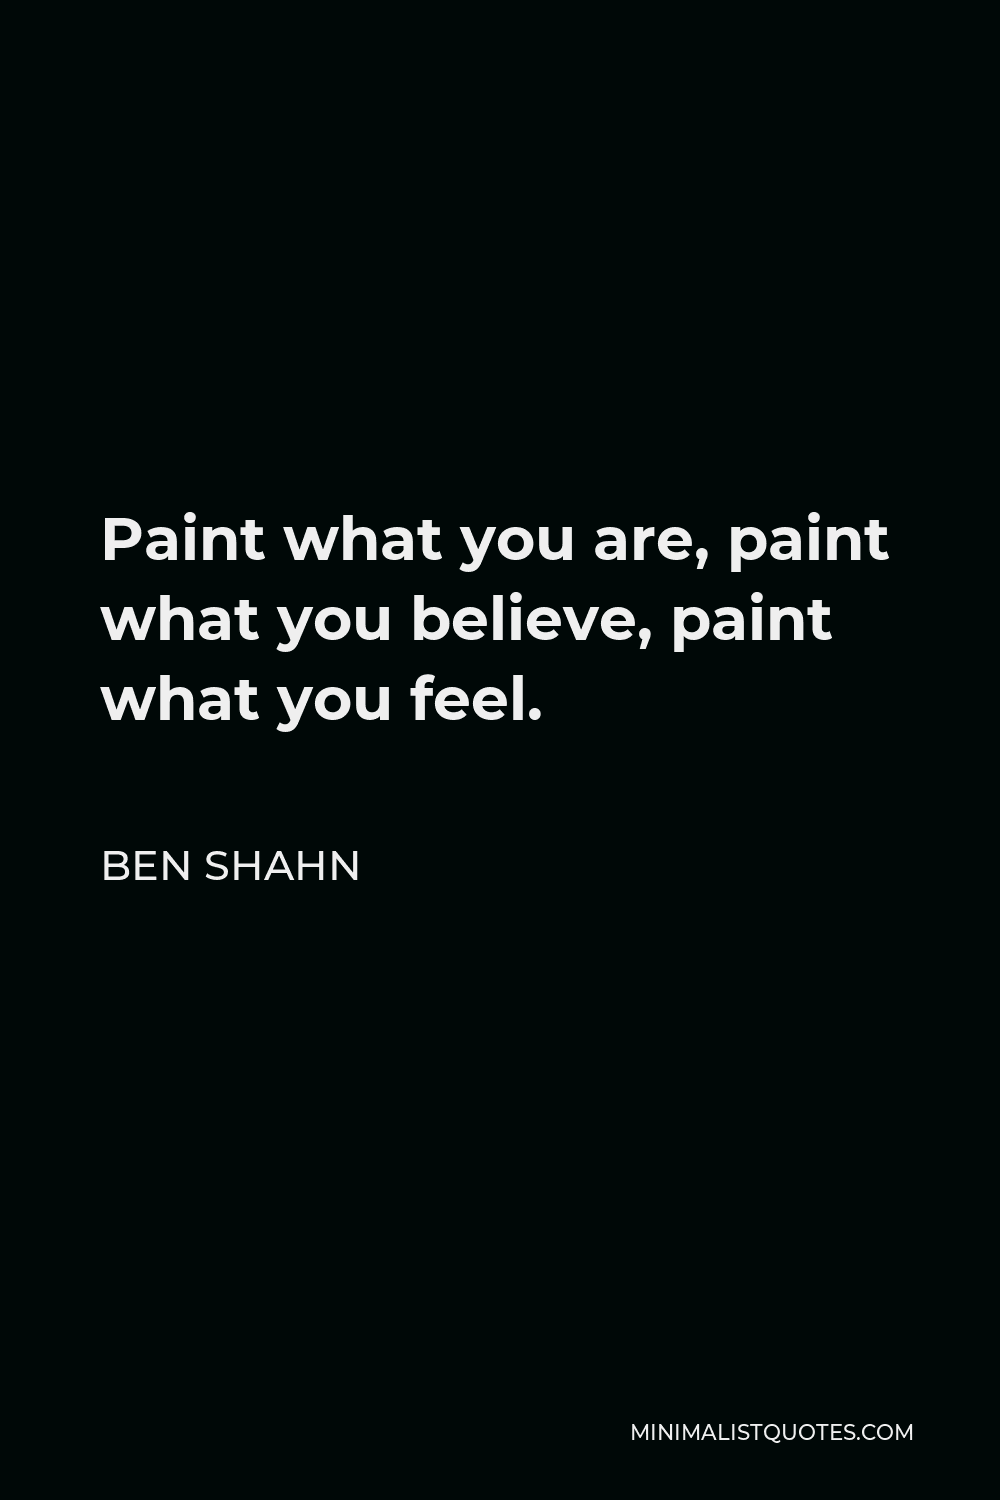 Ben Shahn Quote - Paint what you are, paint what you believe, paint what you feel.